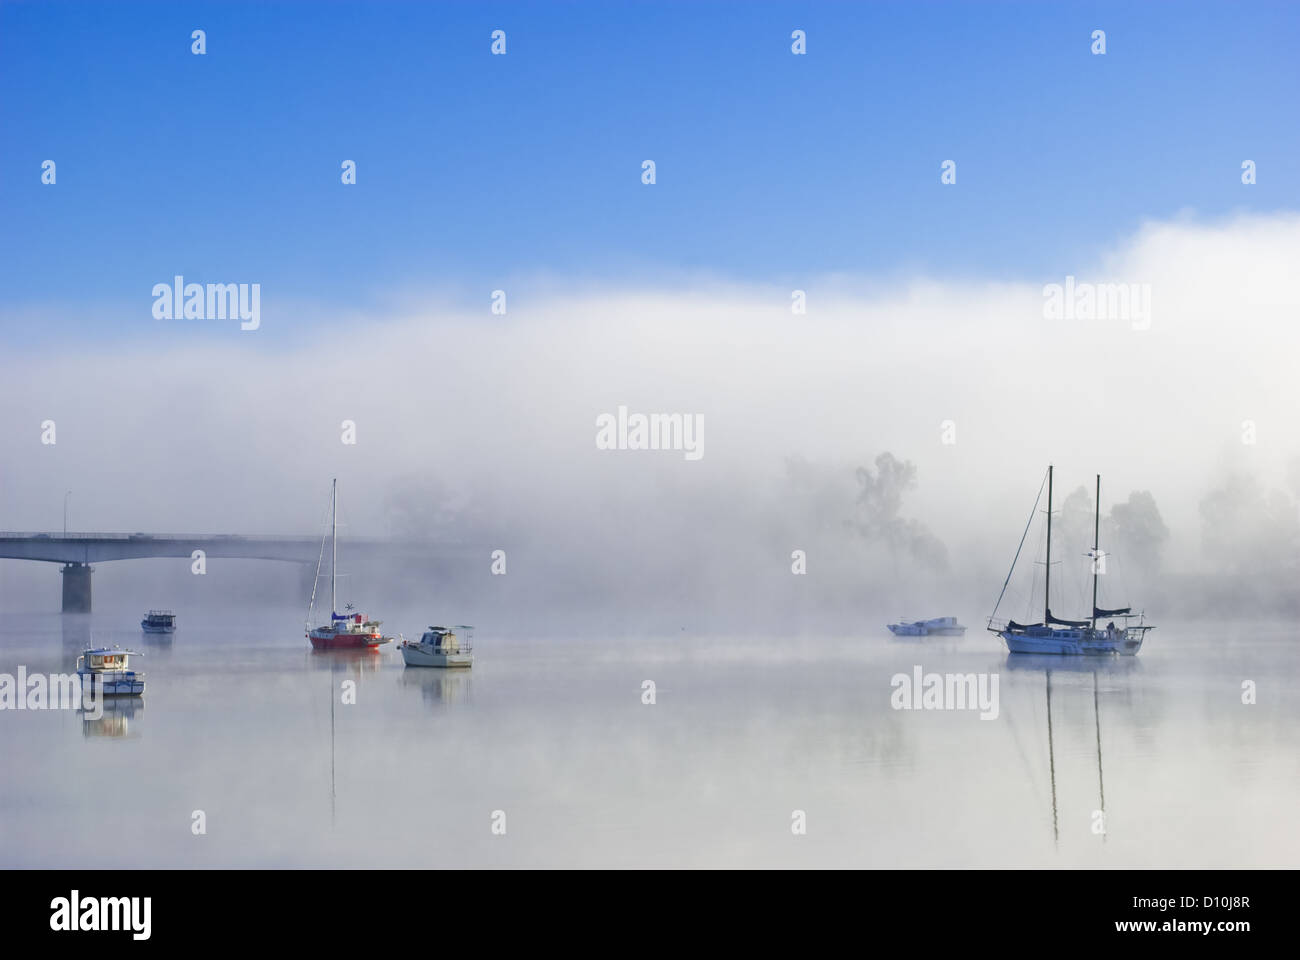 Boats on a foggy river Stock Photo